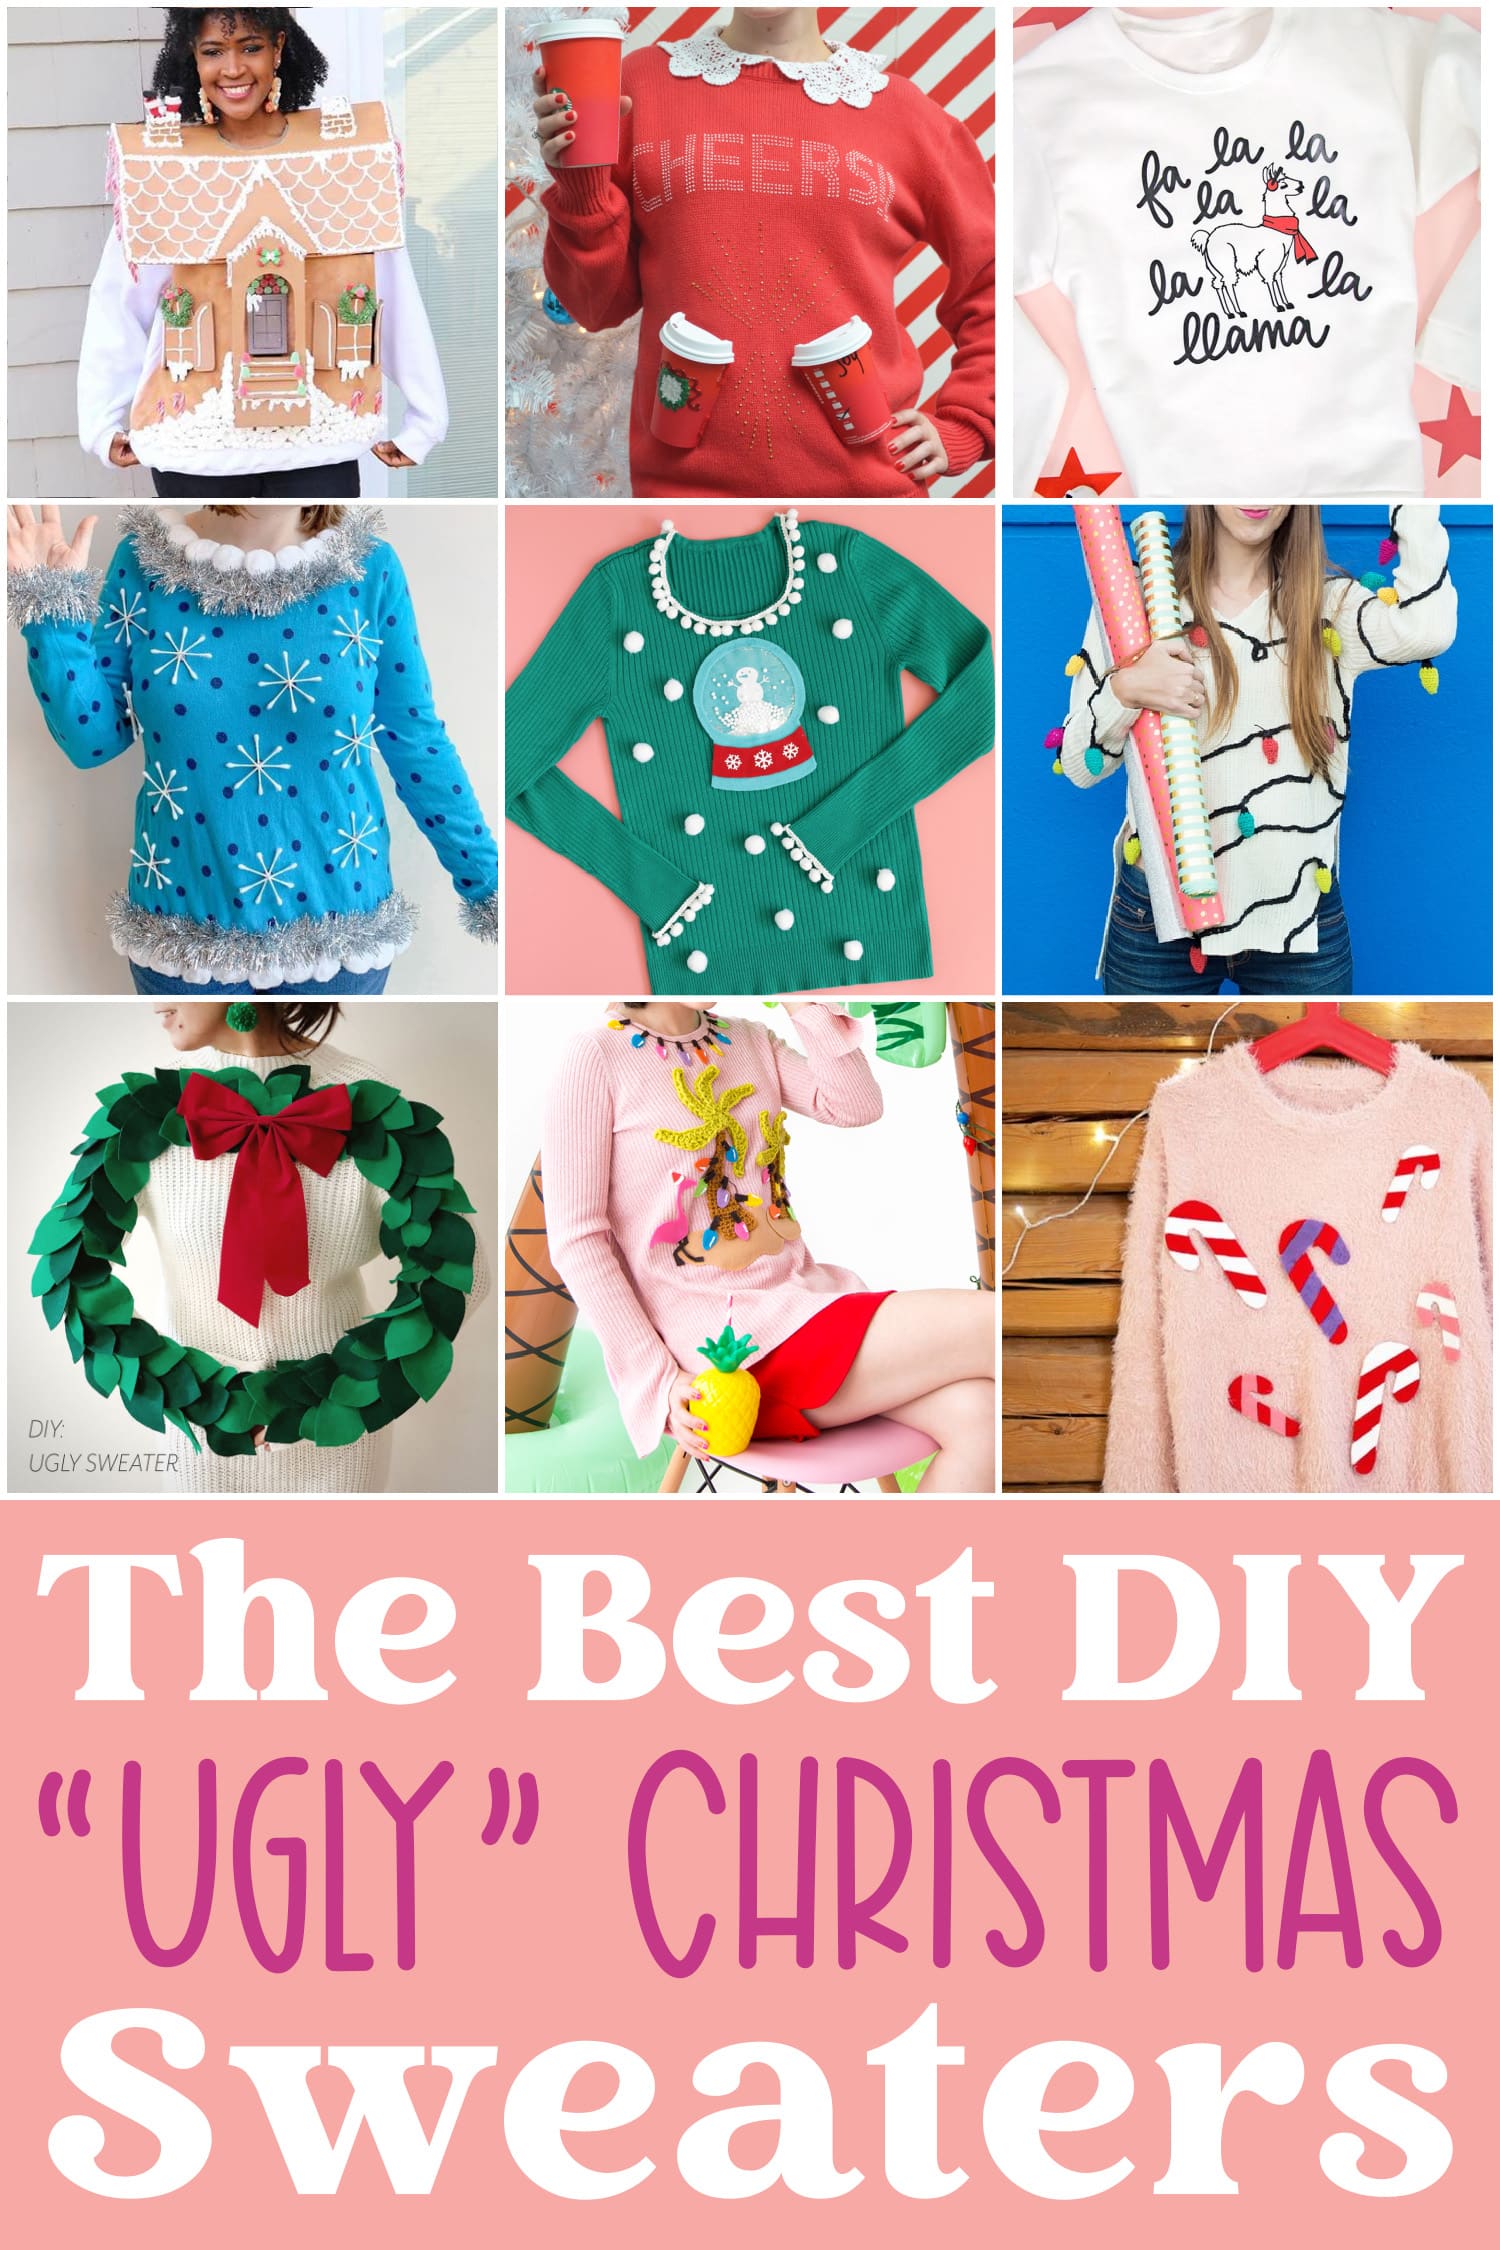 How To Make Ugly Sweaters Cute?